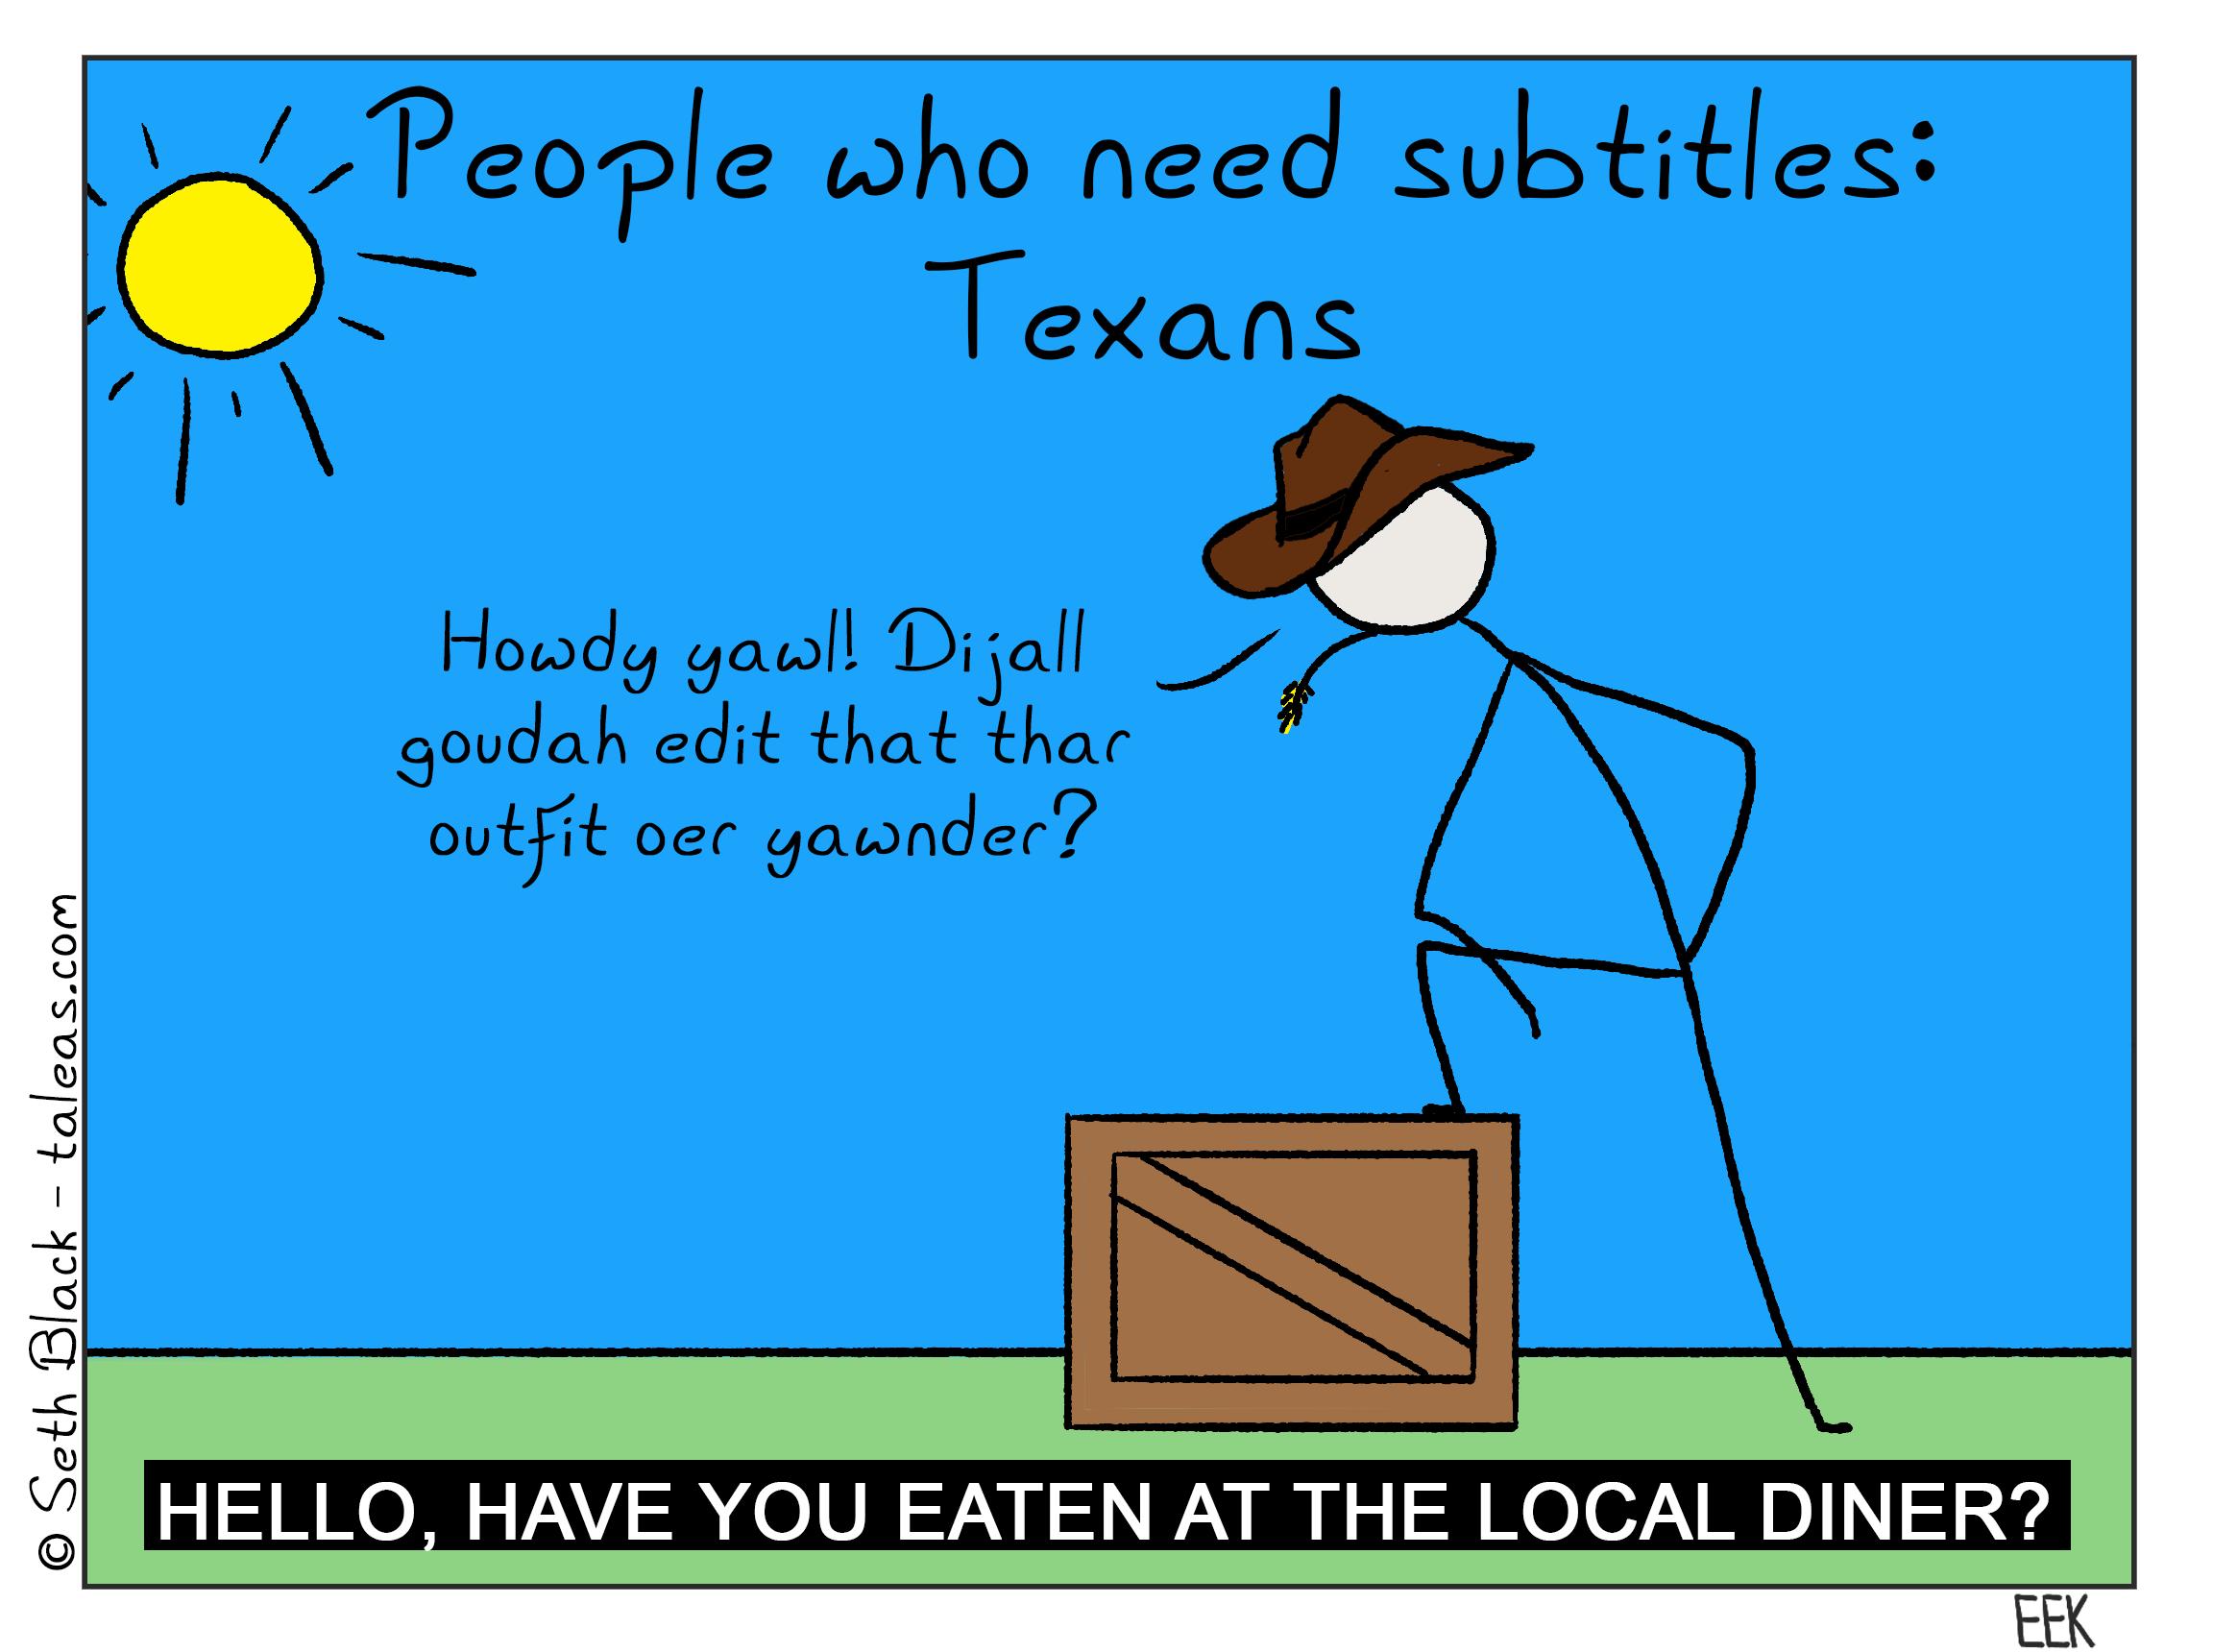 People who need subtitles: Texans. "Howdy y'all did y'all go to eat at that outfit over yonder?" Subtitle: "Hello have you eaten at the local diner?"